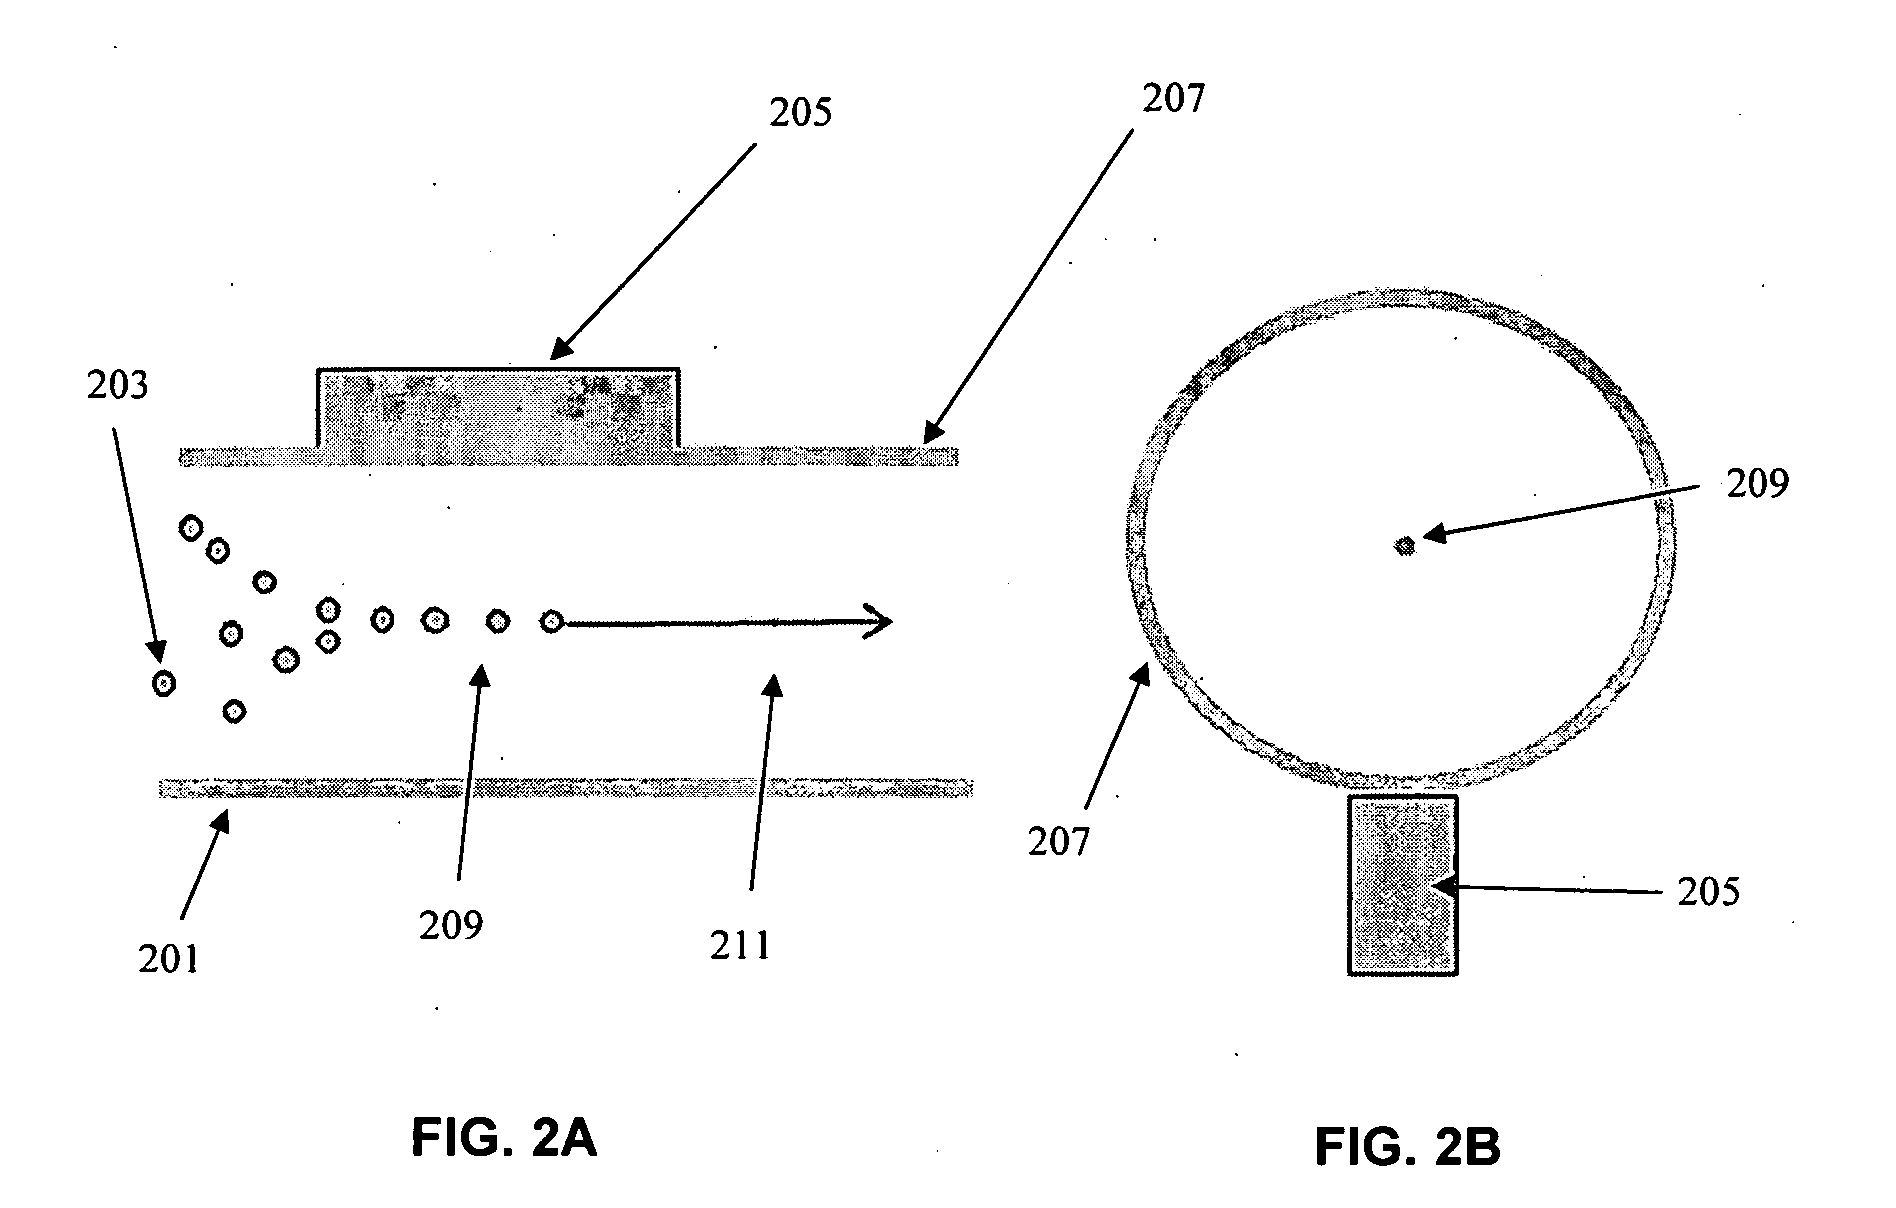 Particle Imaging Systems and Methods Using Acoustic Radiation Pressure